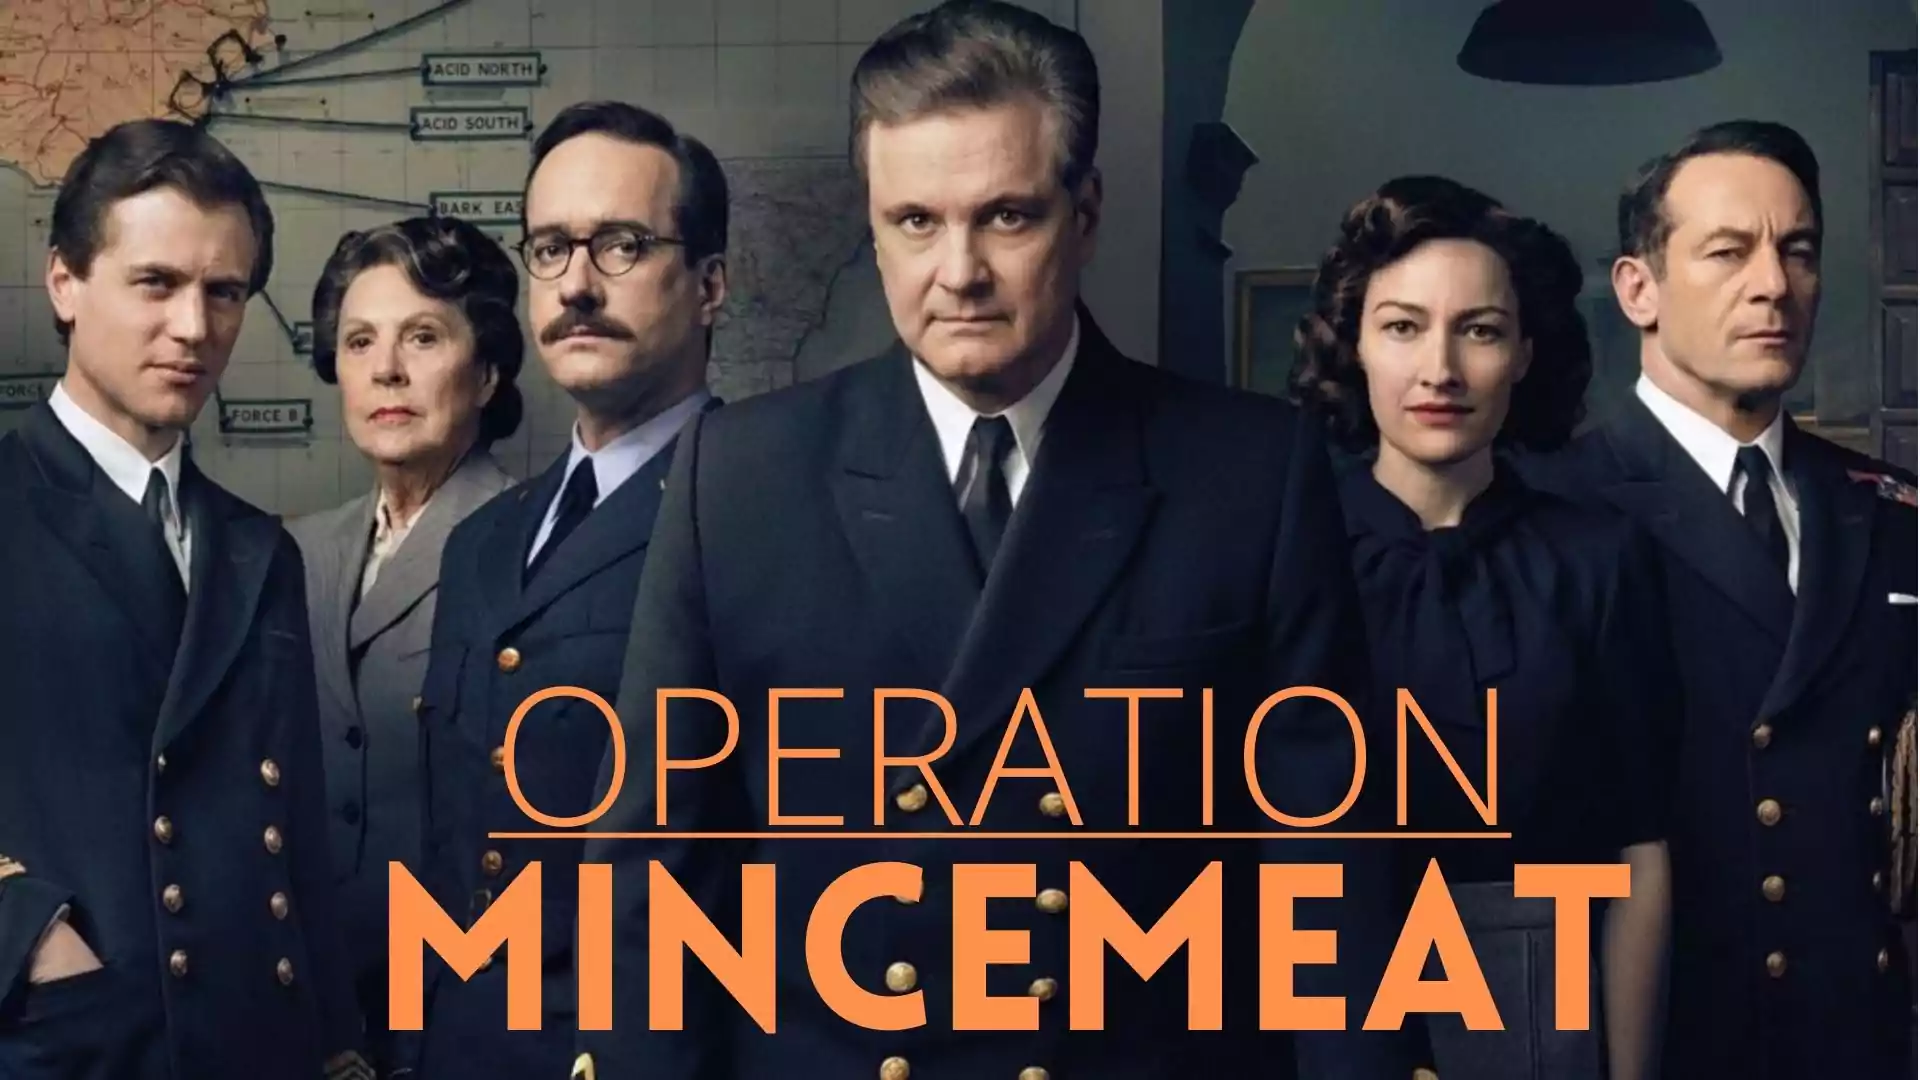 Operation Mincemeat wallpaper and images. Operation Mincemeat Age Rating in UK, US, Australia, Singapore, Germany, Canada, etc... Operation Mincemeat Parents Guide, release date, cast, synopsis.